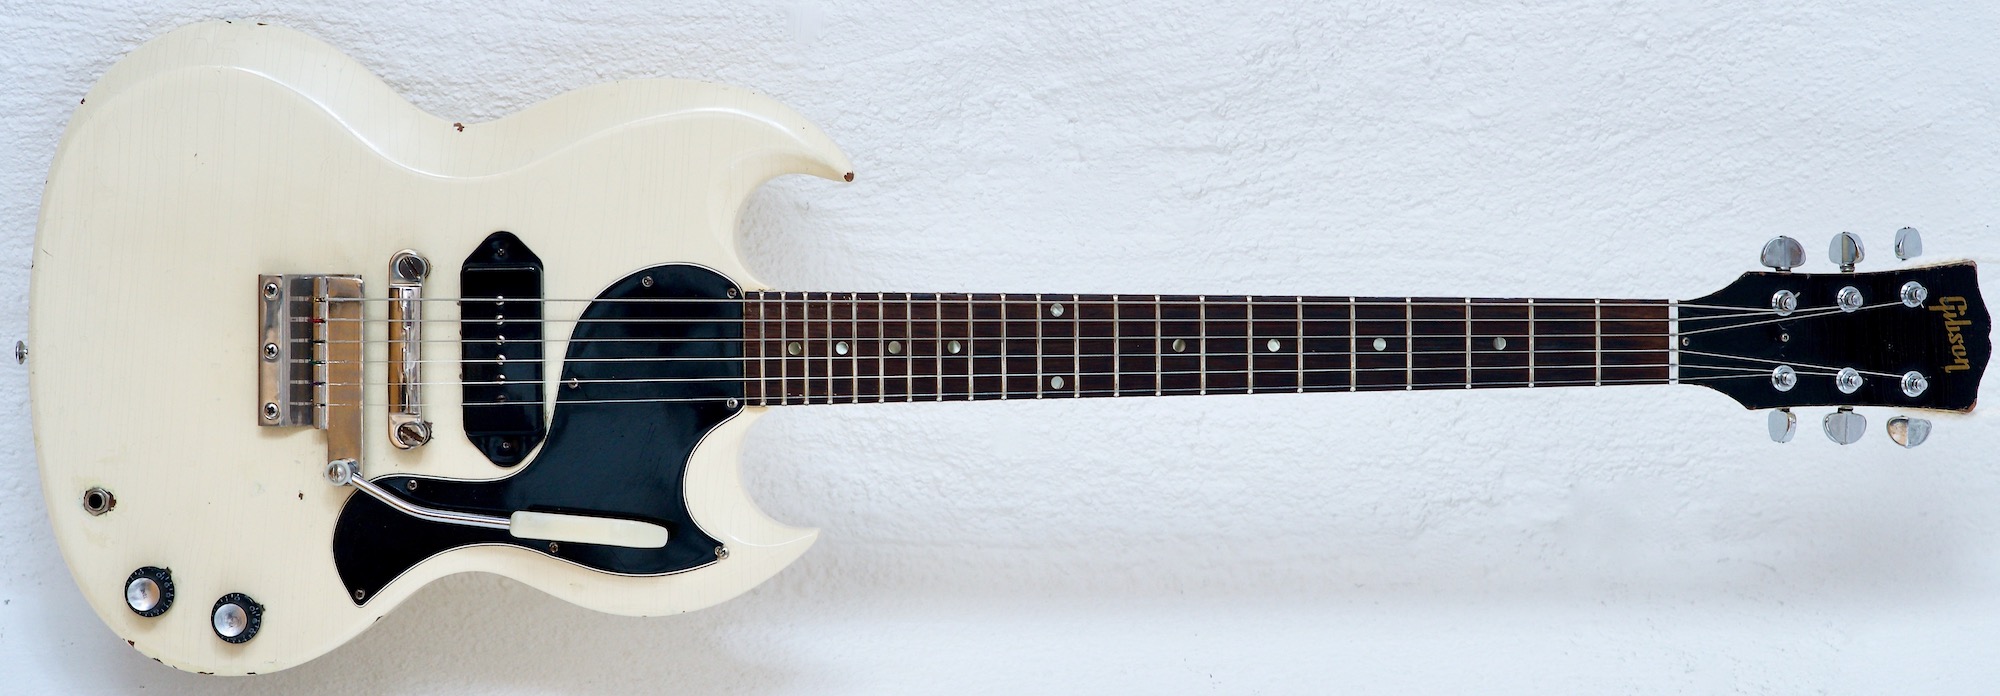 A Gibson SG Tv Jr from 1965